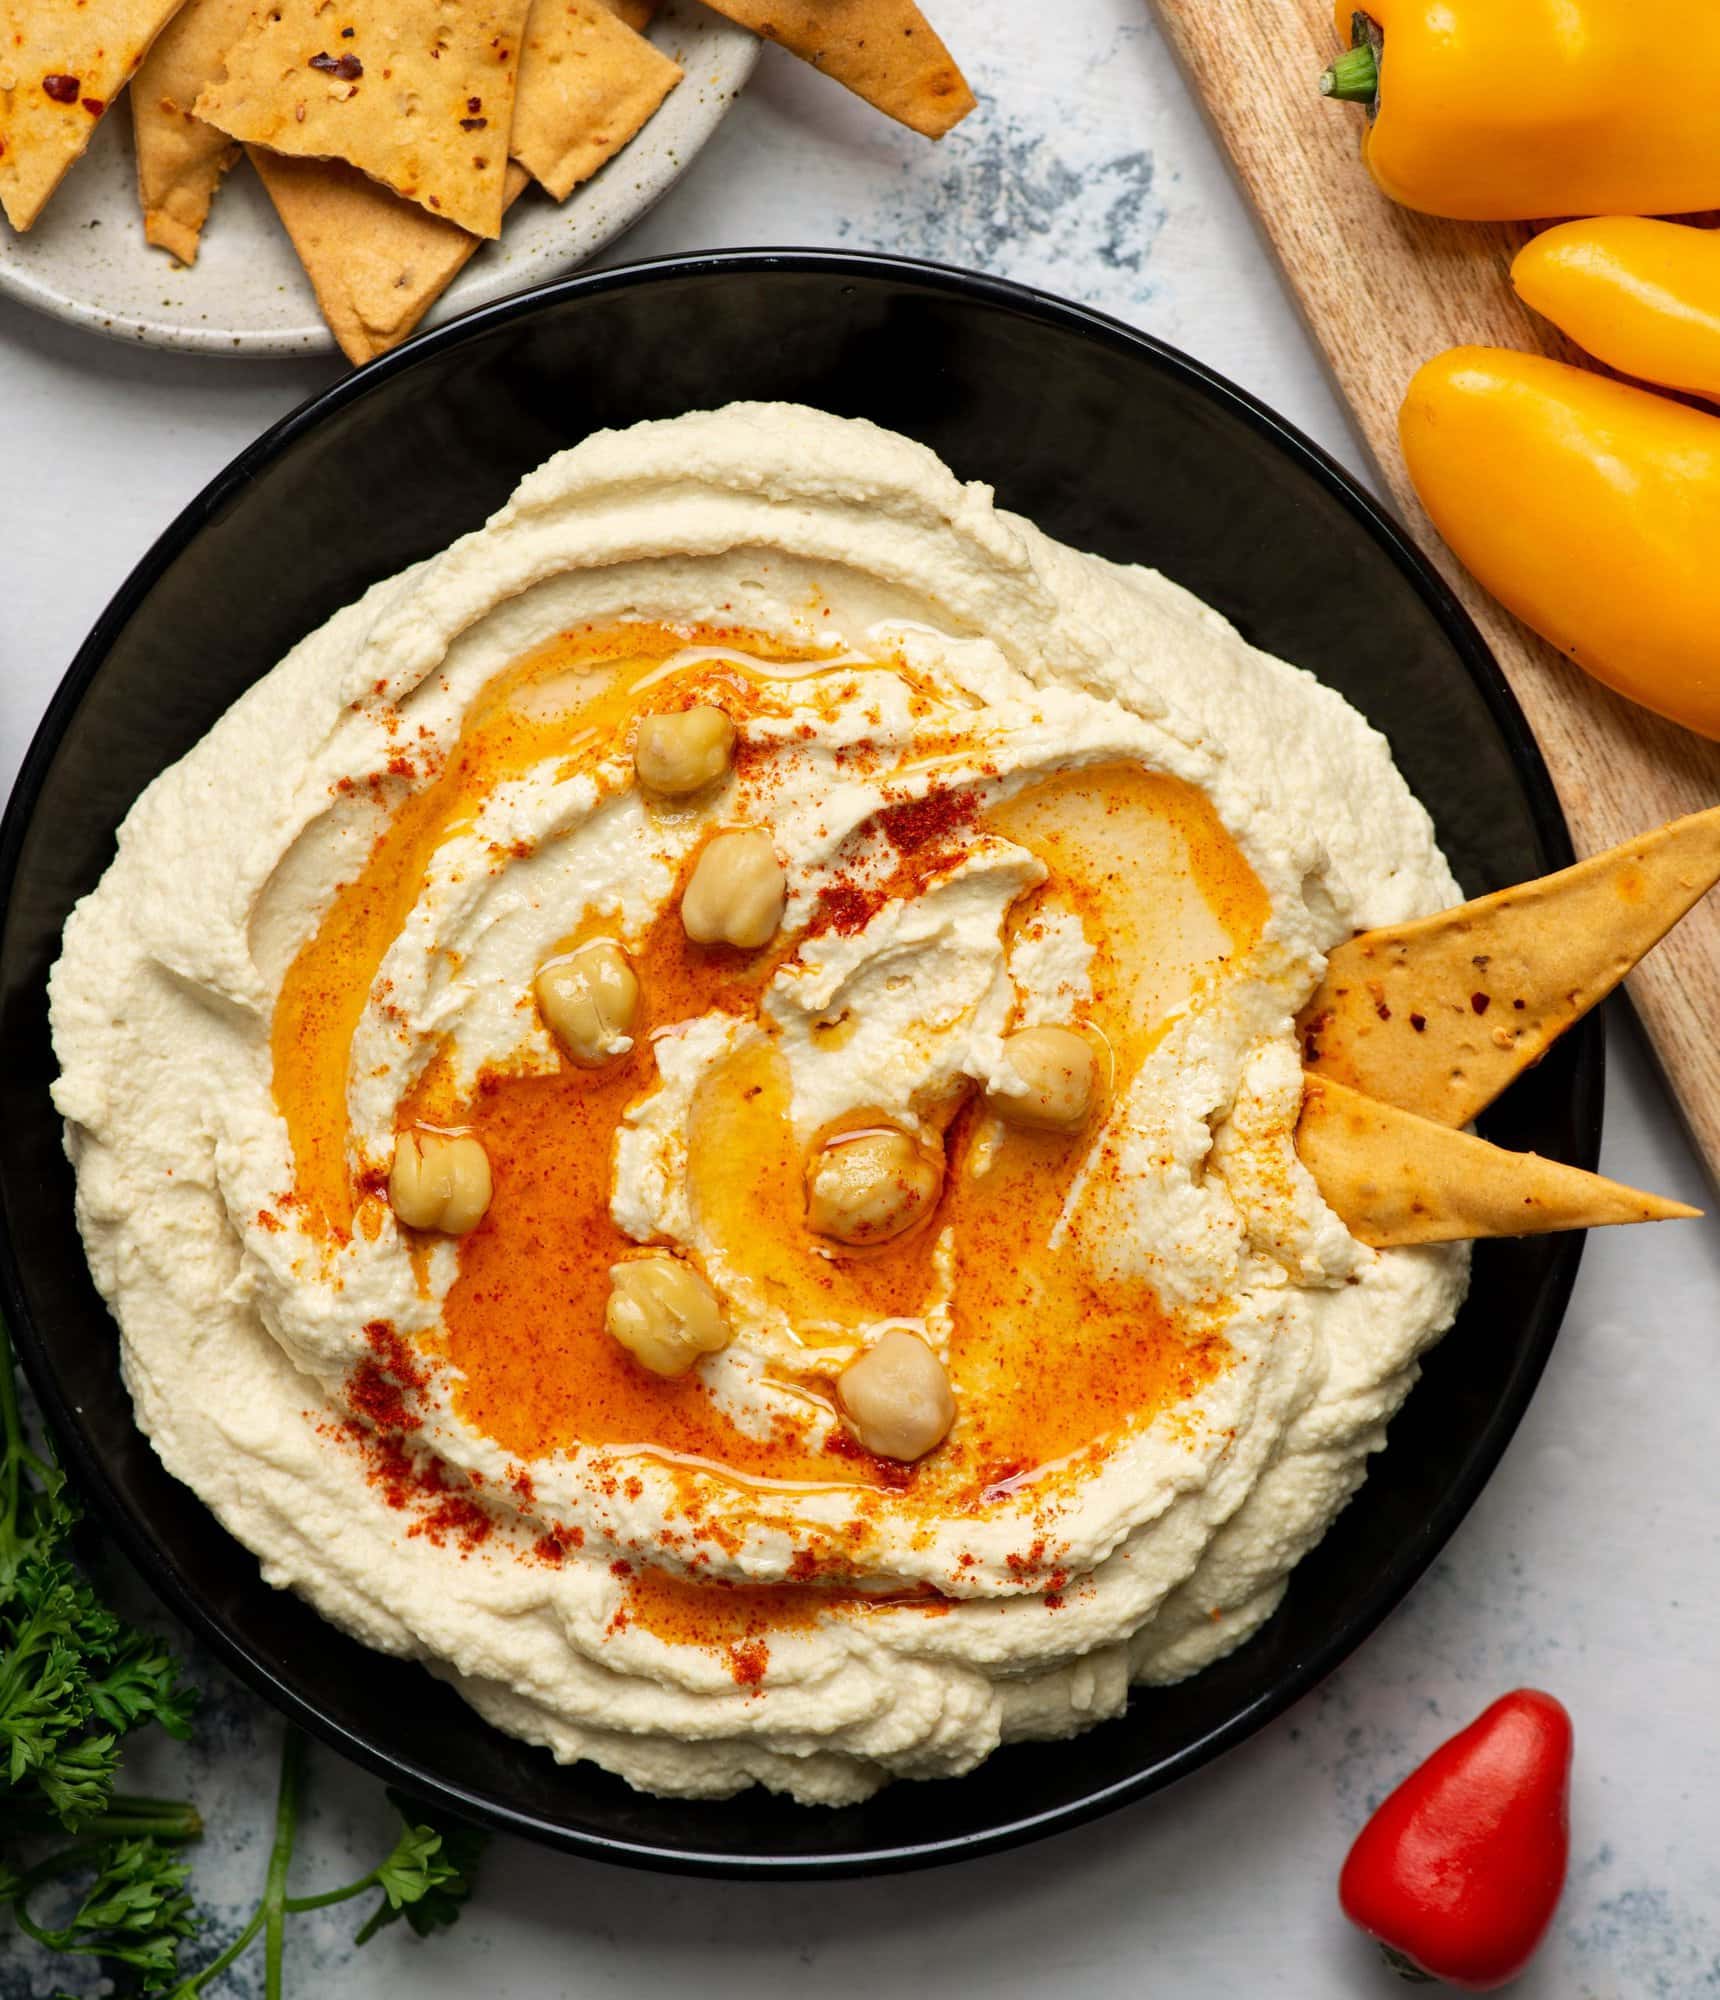 Picture showing Creamy and healthy hummus served on a black plate with chickpeas and olive oil as garnish along with pita bites.